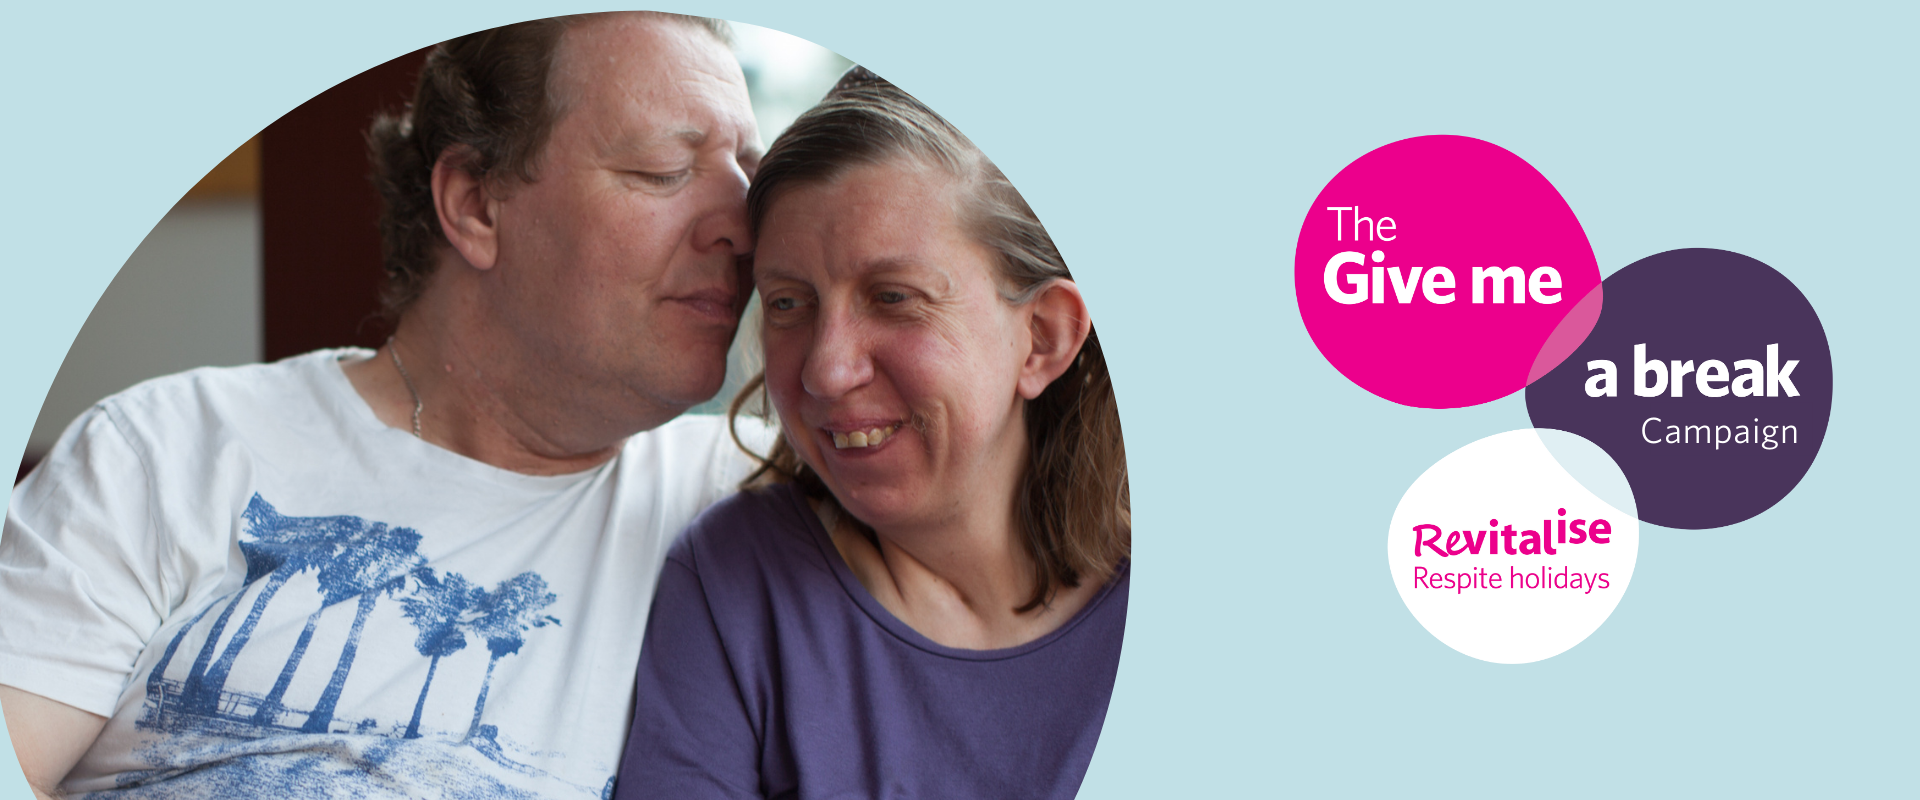 Graphic image showing a man and woman cuddling and Revitalise's Give me a break campaign logo against a light blue background